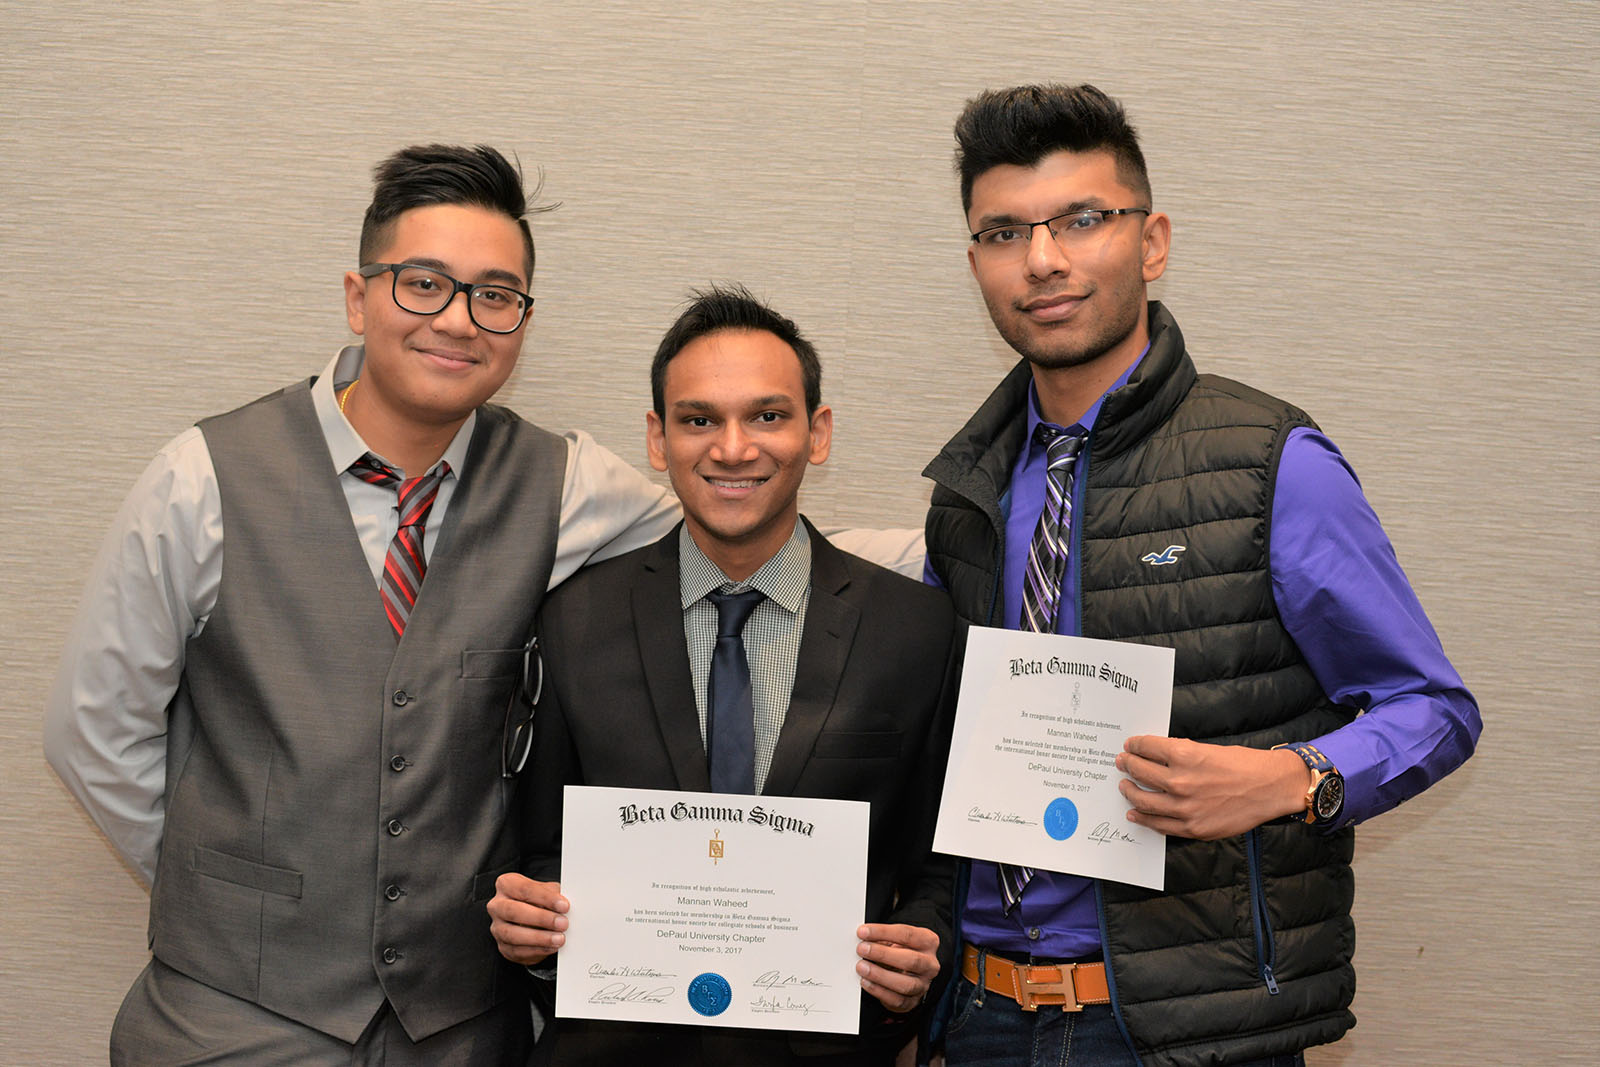 DePaul business students pose with their Beta Gamma Sigma induction certificates.